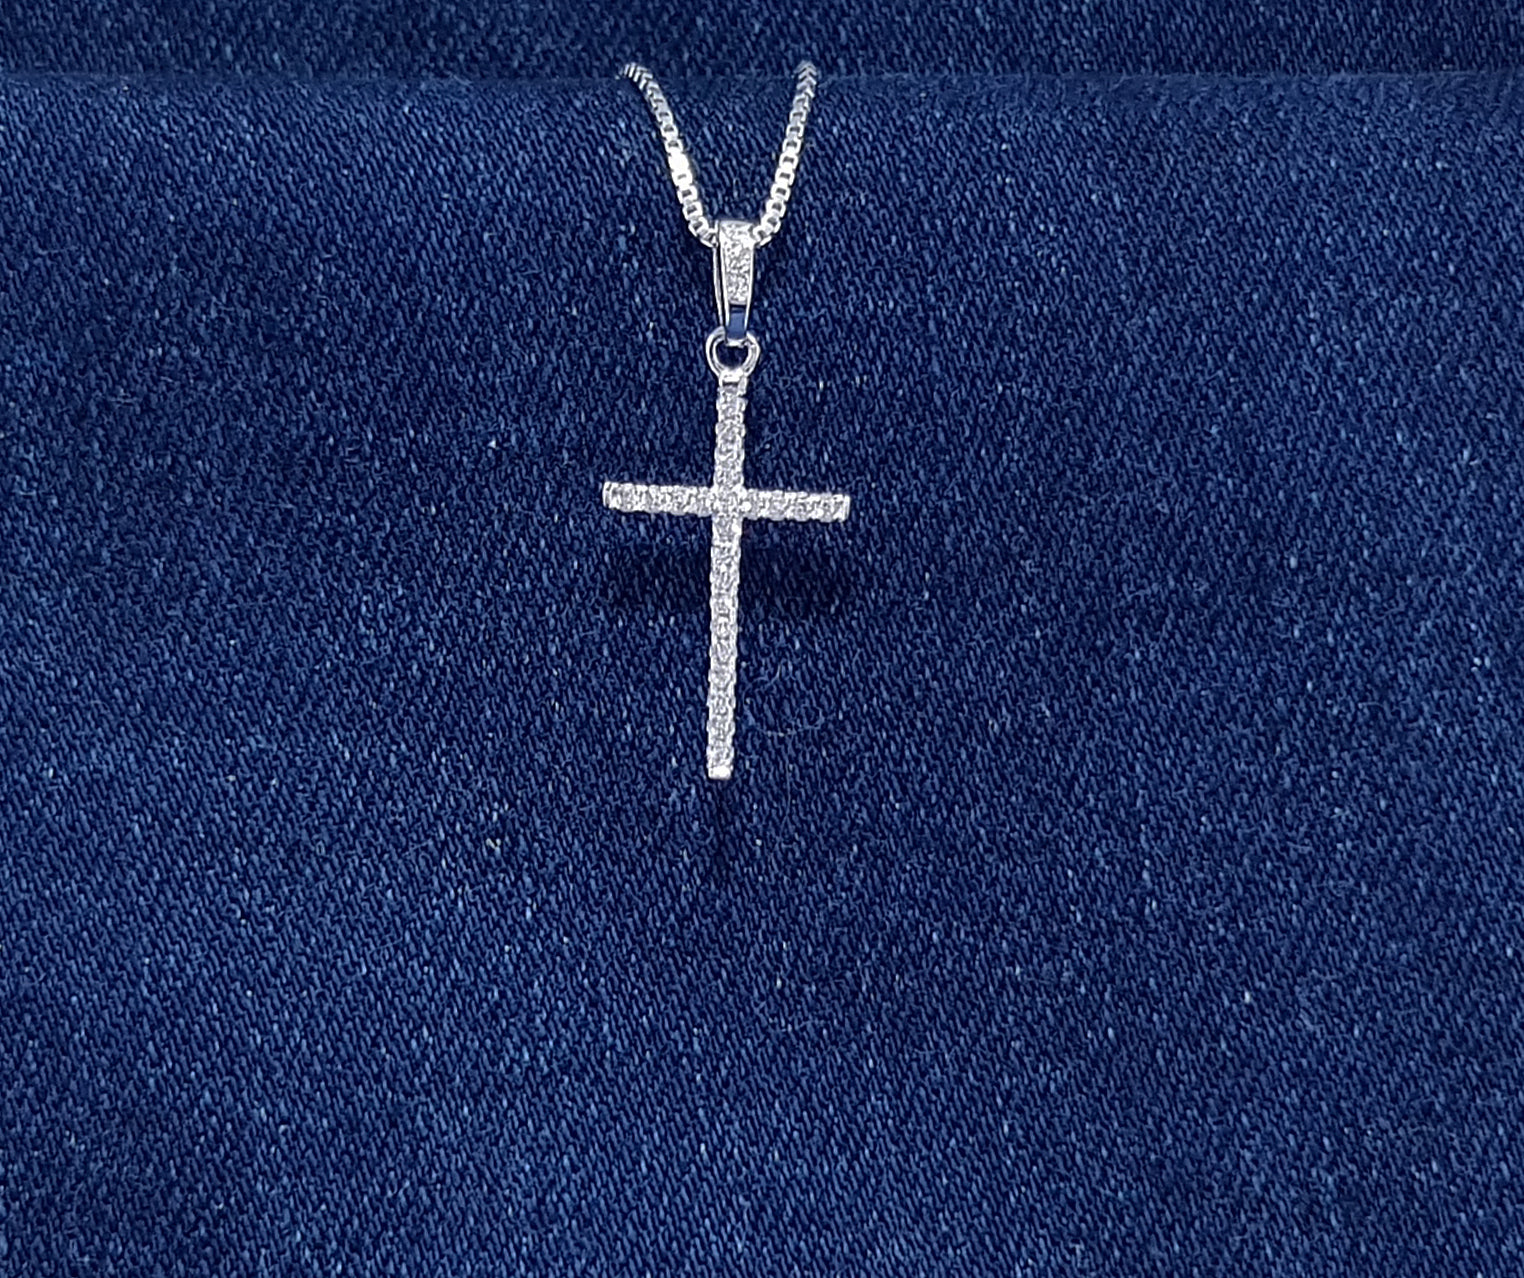 Sterling silver cross with cubic zirconia stones - fine cross